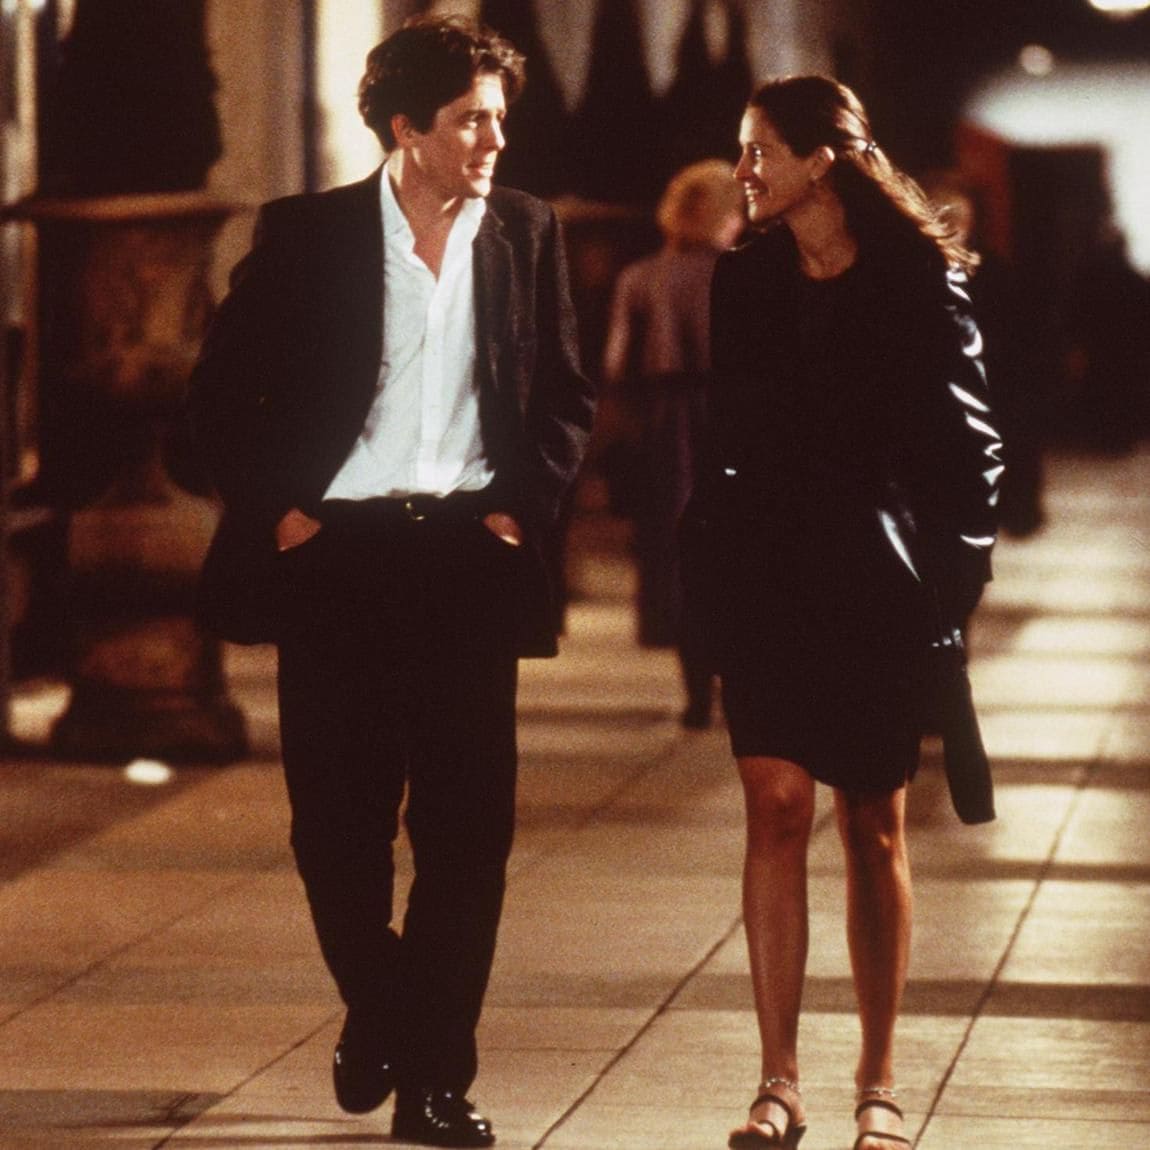 Julia Roberts And Hugh Grant Star In The Premiere Of Notting Hill Photo Universal Studios